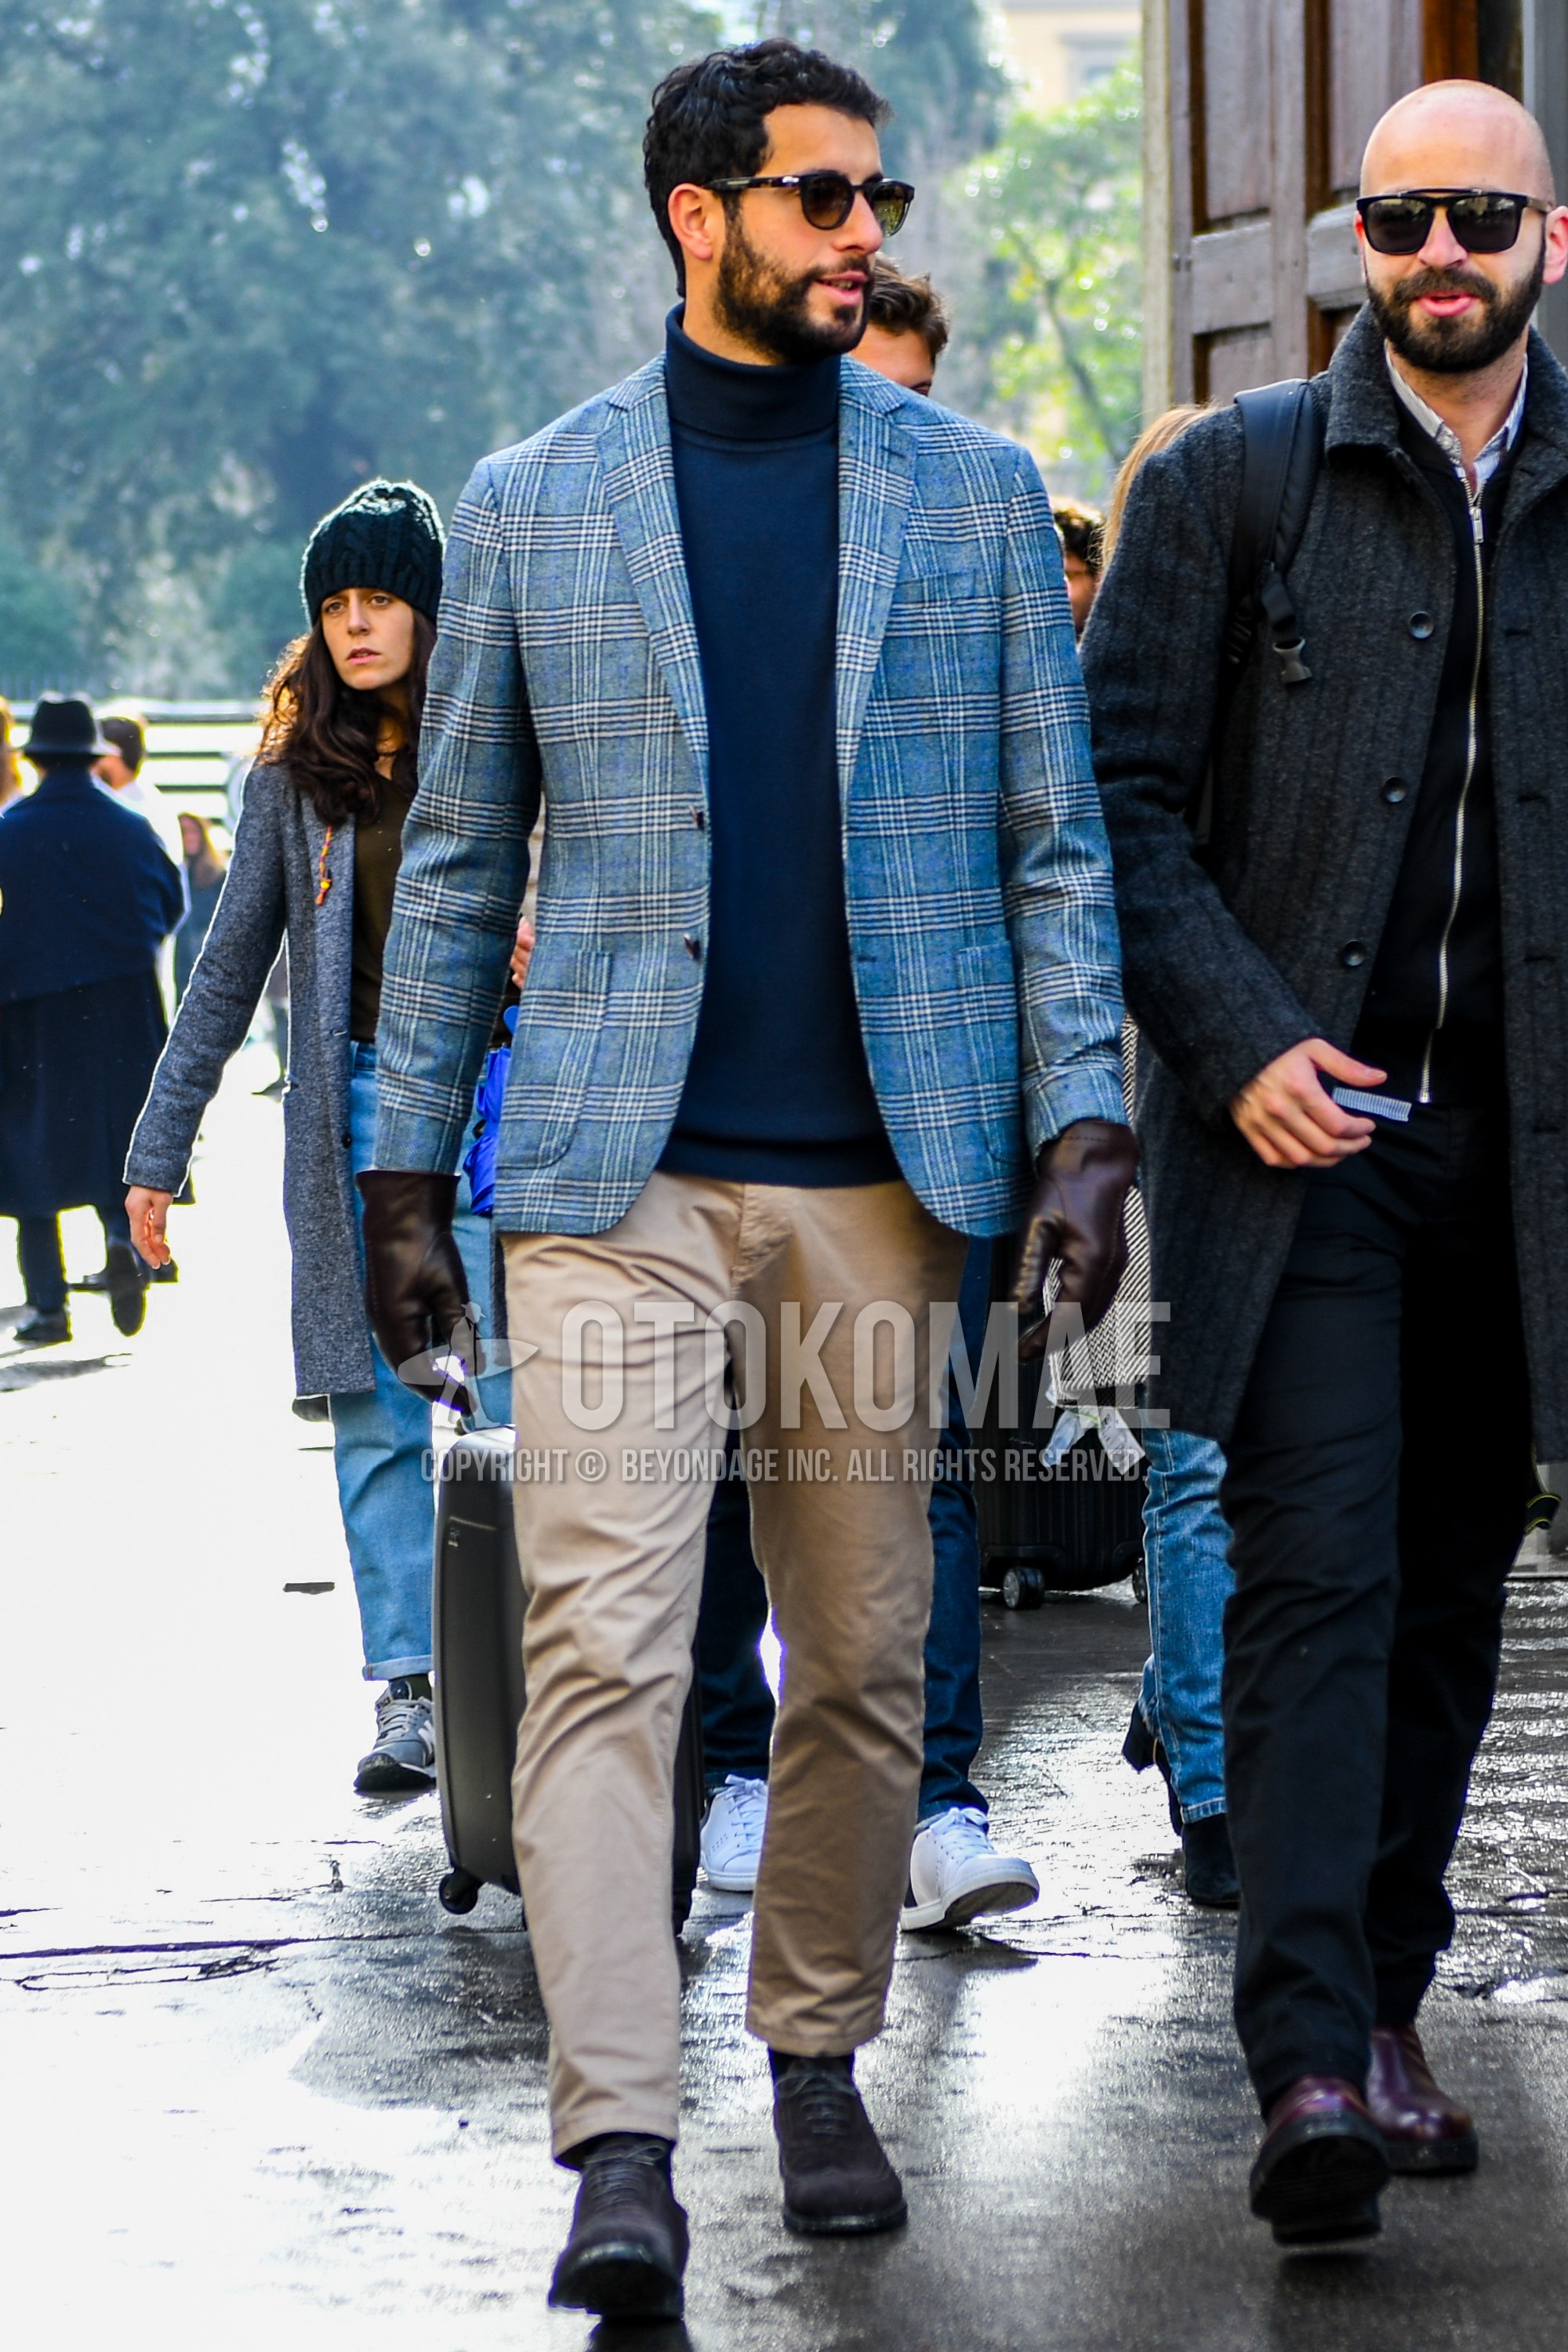 Men's autumn winter outfit with plain sunglasses, check tailored jacket, light blue plain turtleneck knit, beige plain chinos, brown wing-tip shoes leather shoes, suede shoes leather shoes.